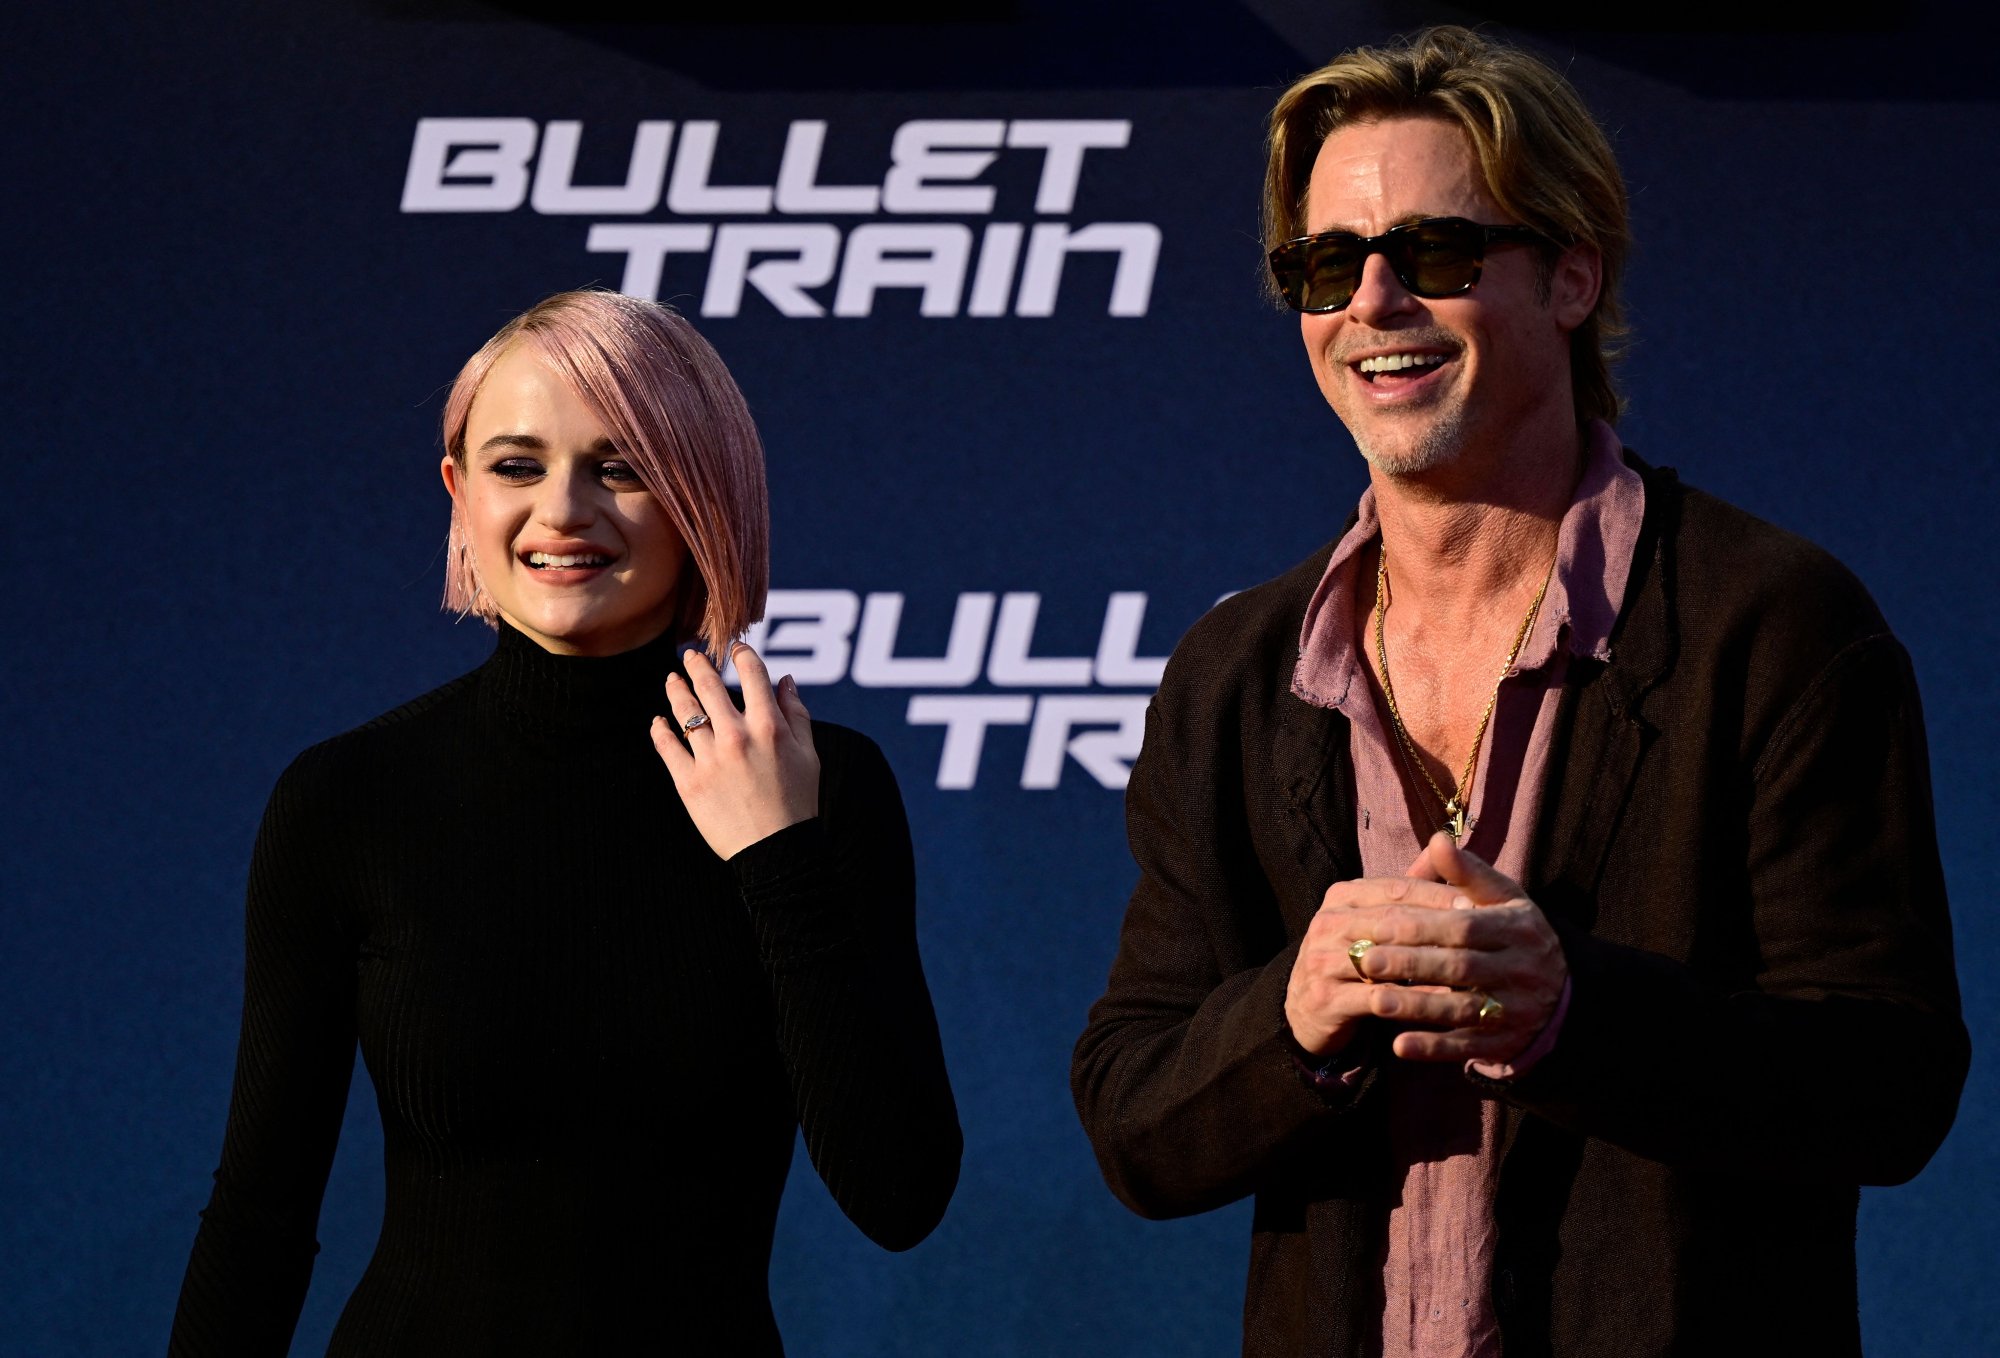 'Bullet Train' Joey King and Brad Pitt smiling in front of movie title font